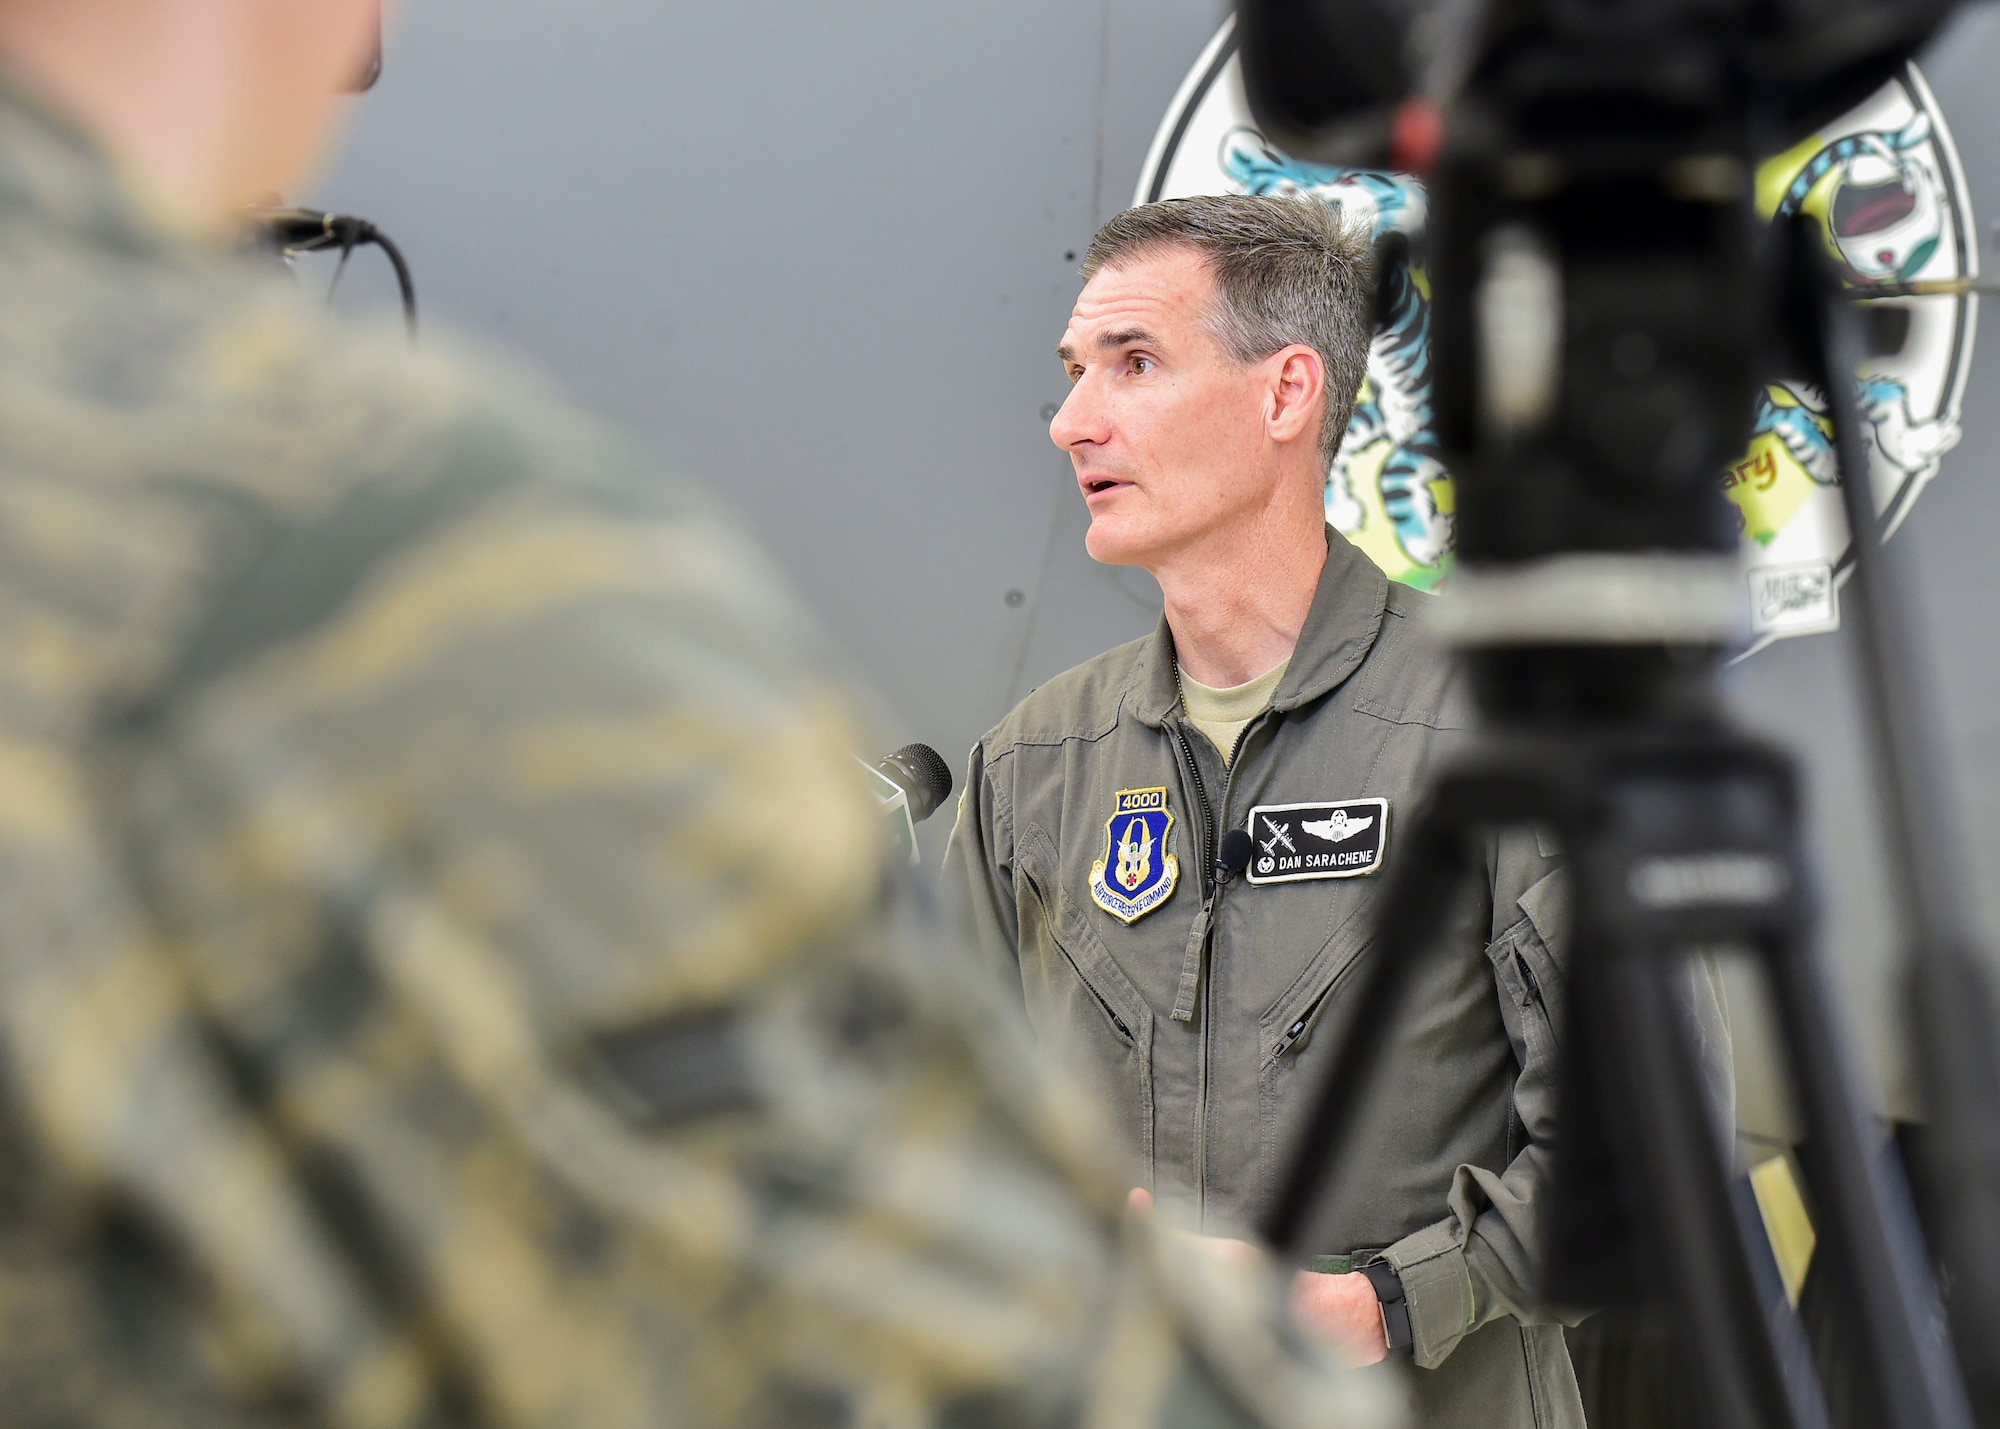 910th Airlift Wing Commander Col. Dan Sarachene talks with a local reporter May 3, 2018, after a ceremony to unveil a new aircraft tail flash and nose art.